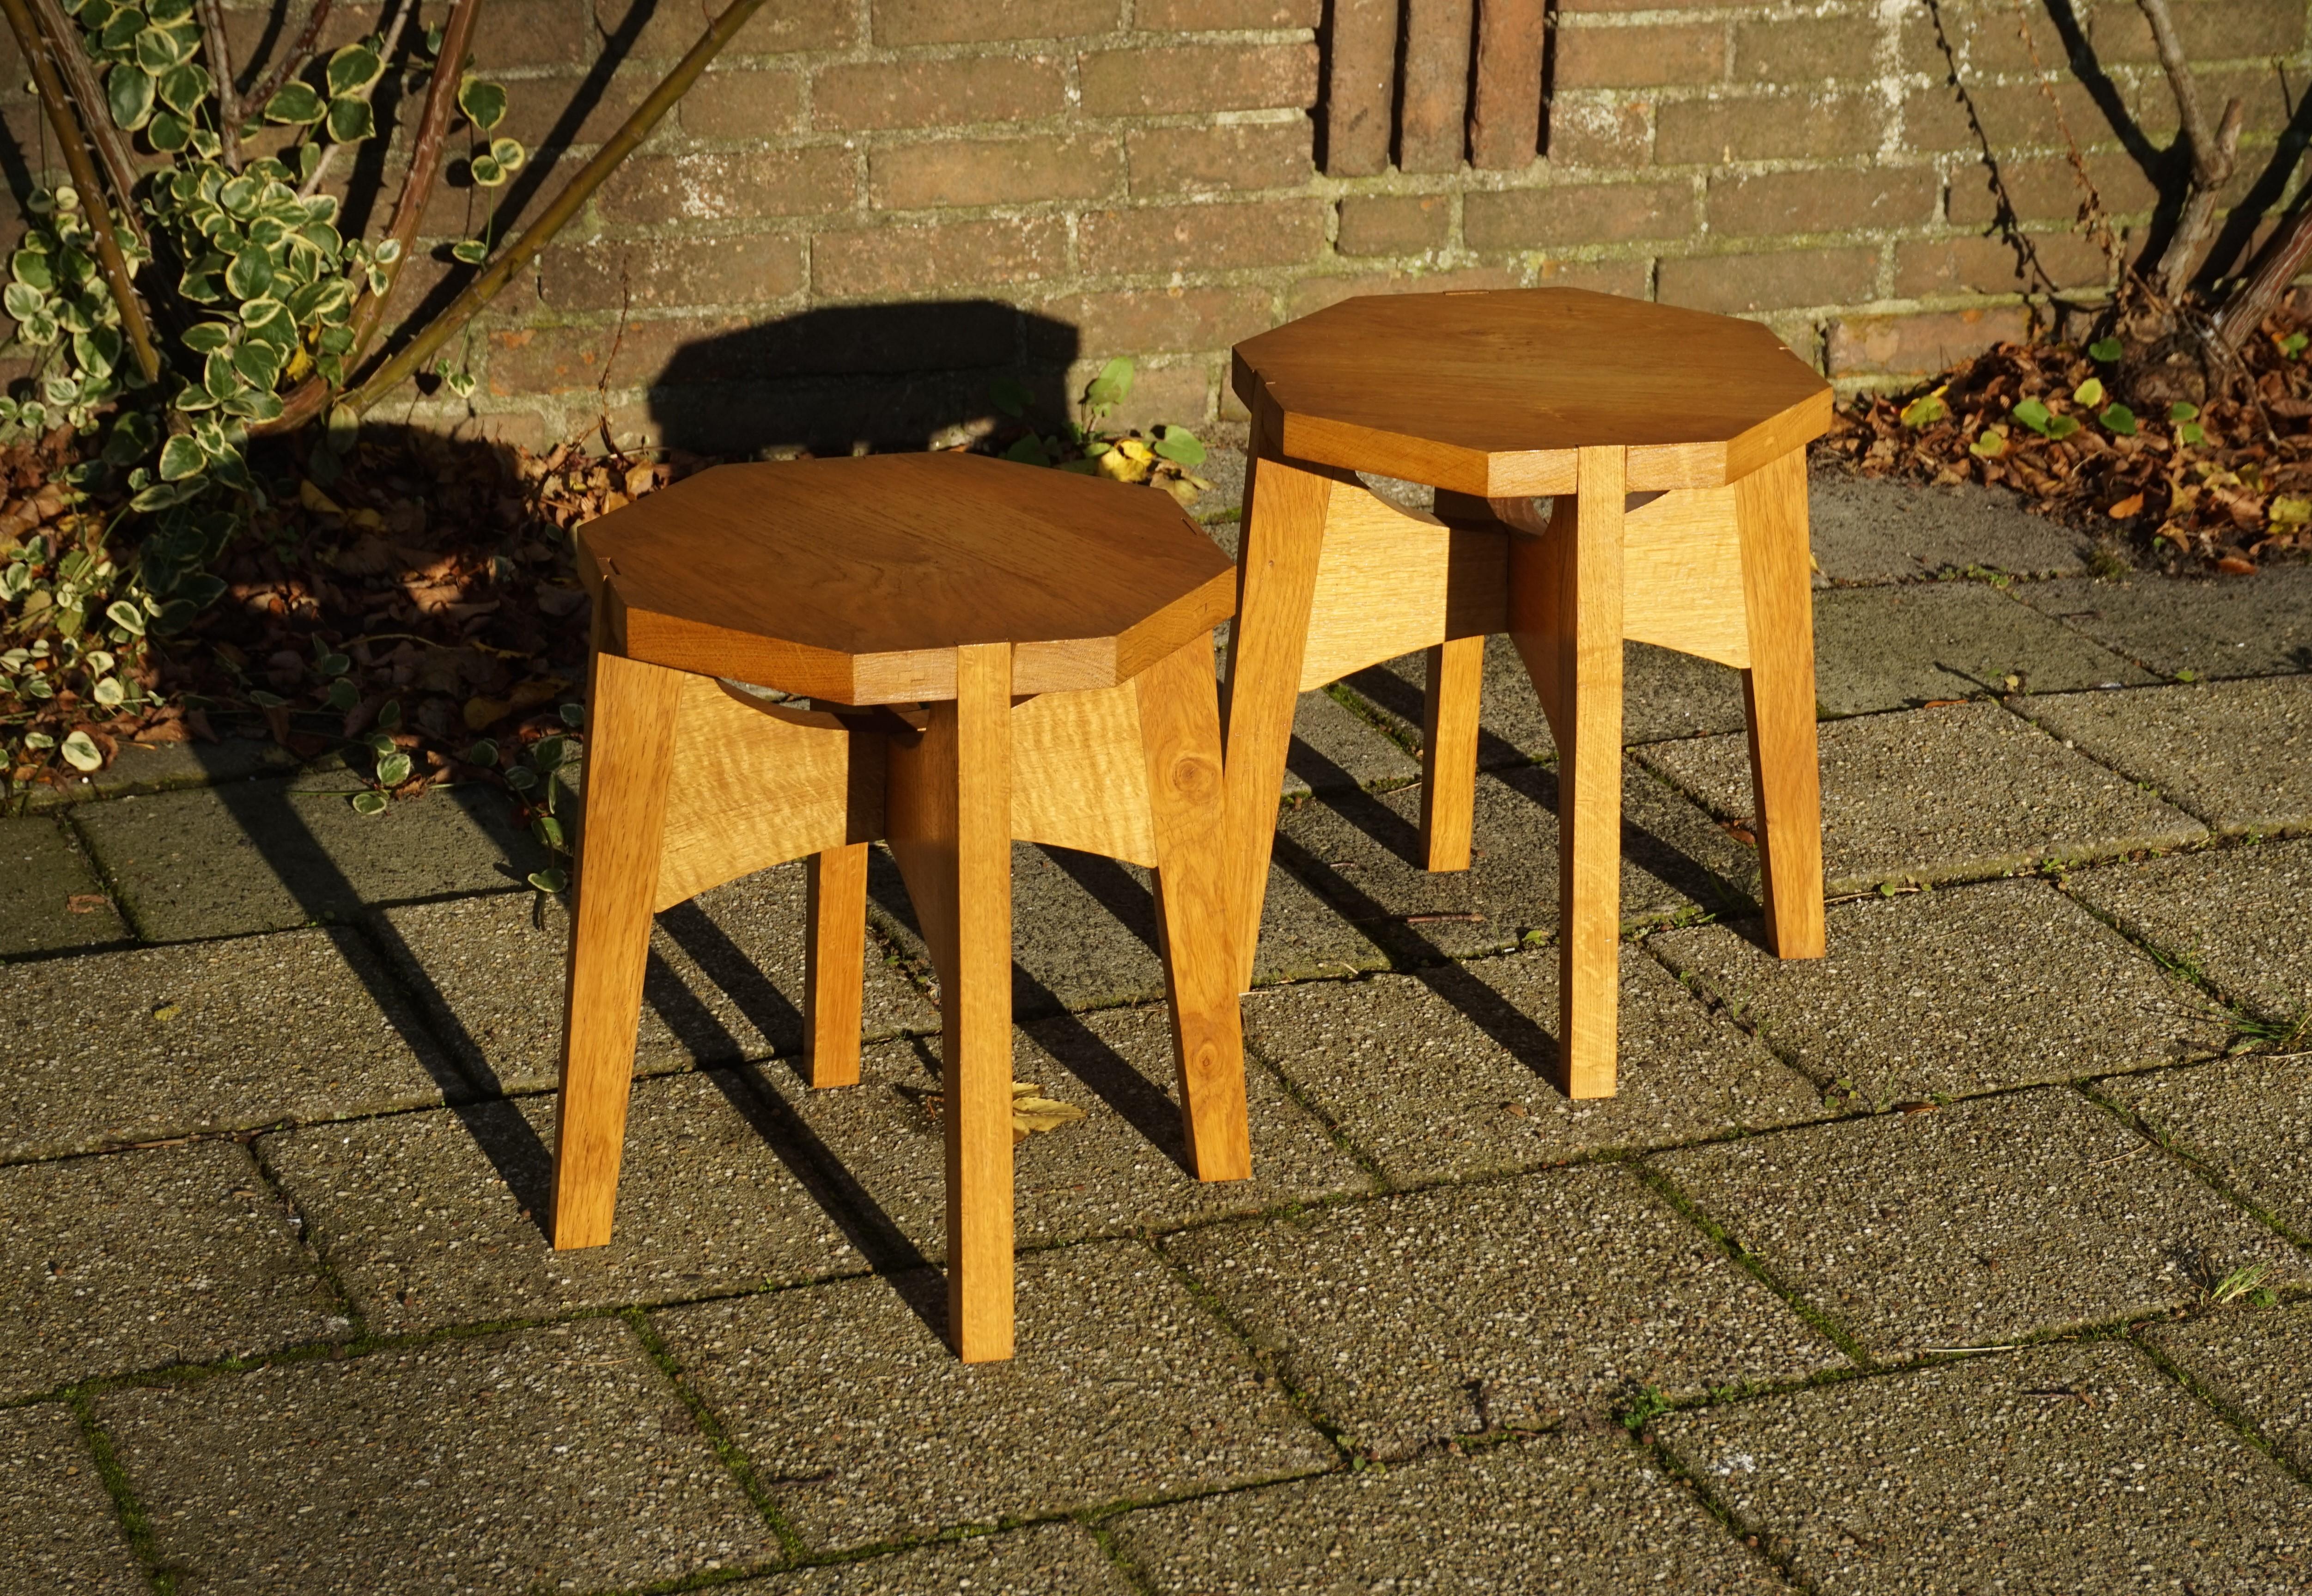 Rare, stylish and highly practical pair of midcentury tables.

These beautifully designed and smartly handcrafted end tables or small pedestals could not be in better condition. We think they may have been made for an artist or gallery, because they